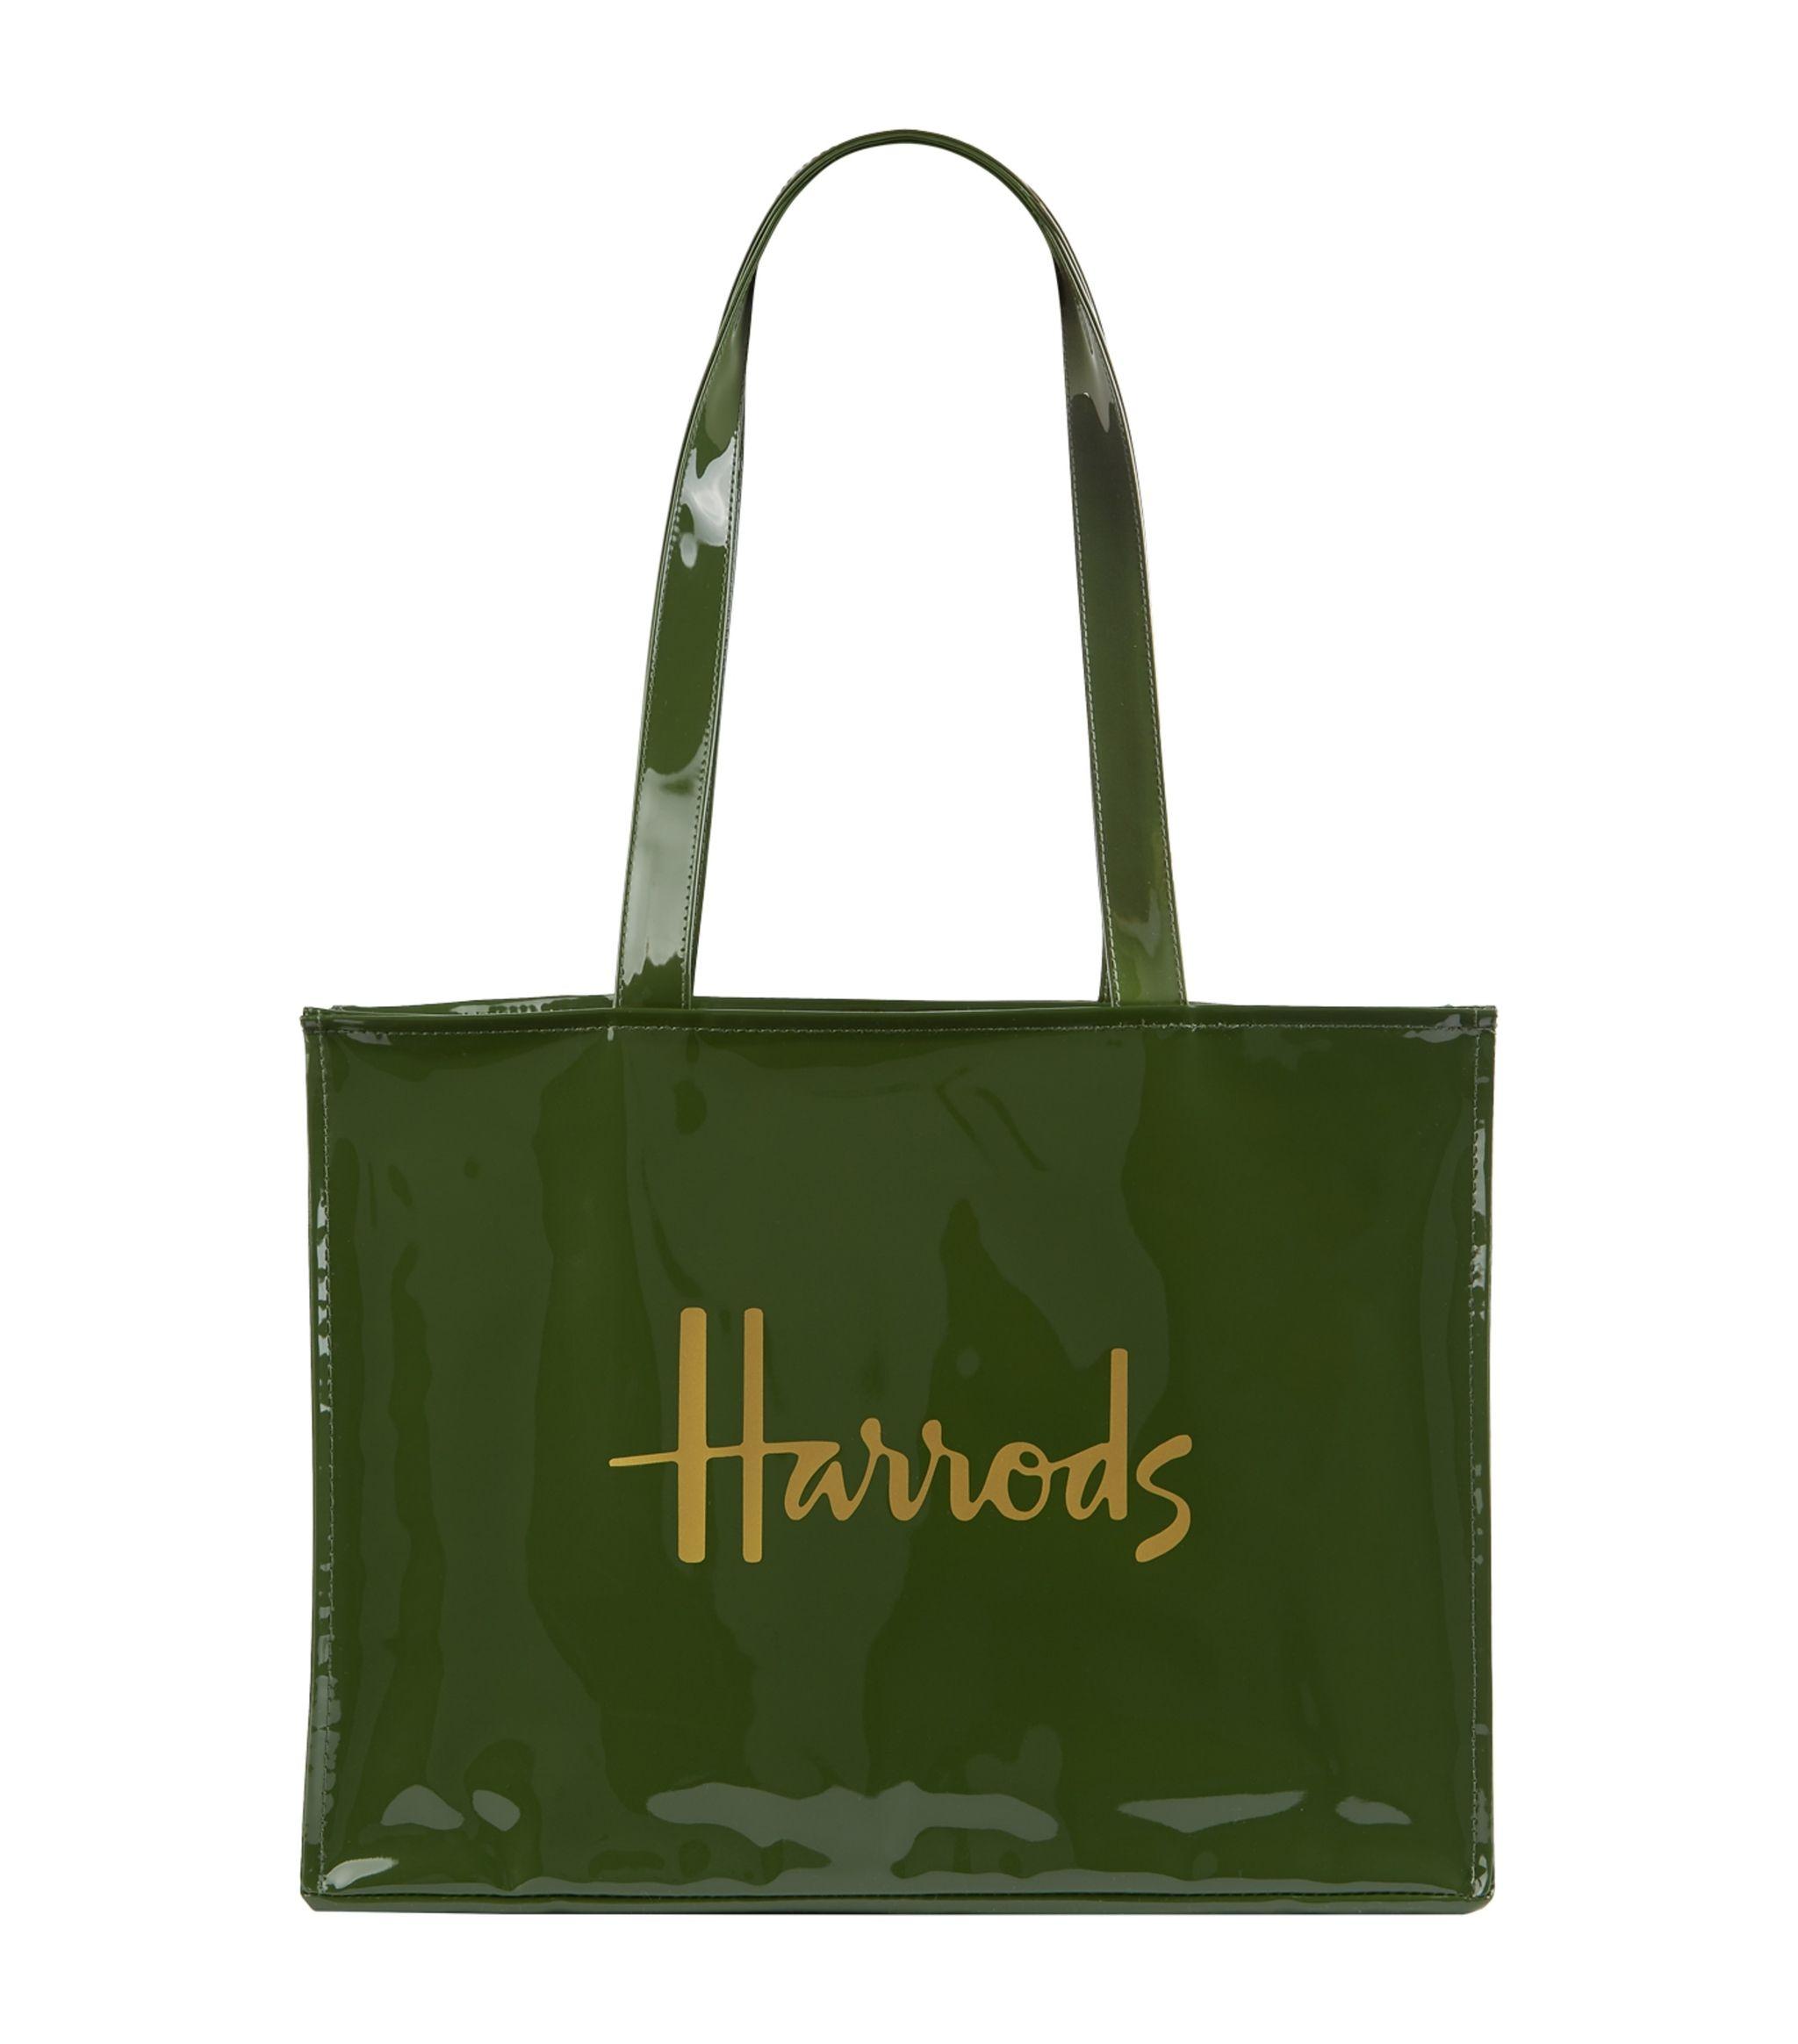 Harrods Logo Tote Bag in Green - Save 14% - Lyst